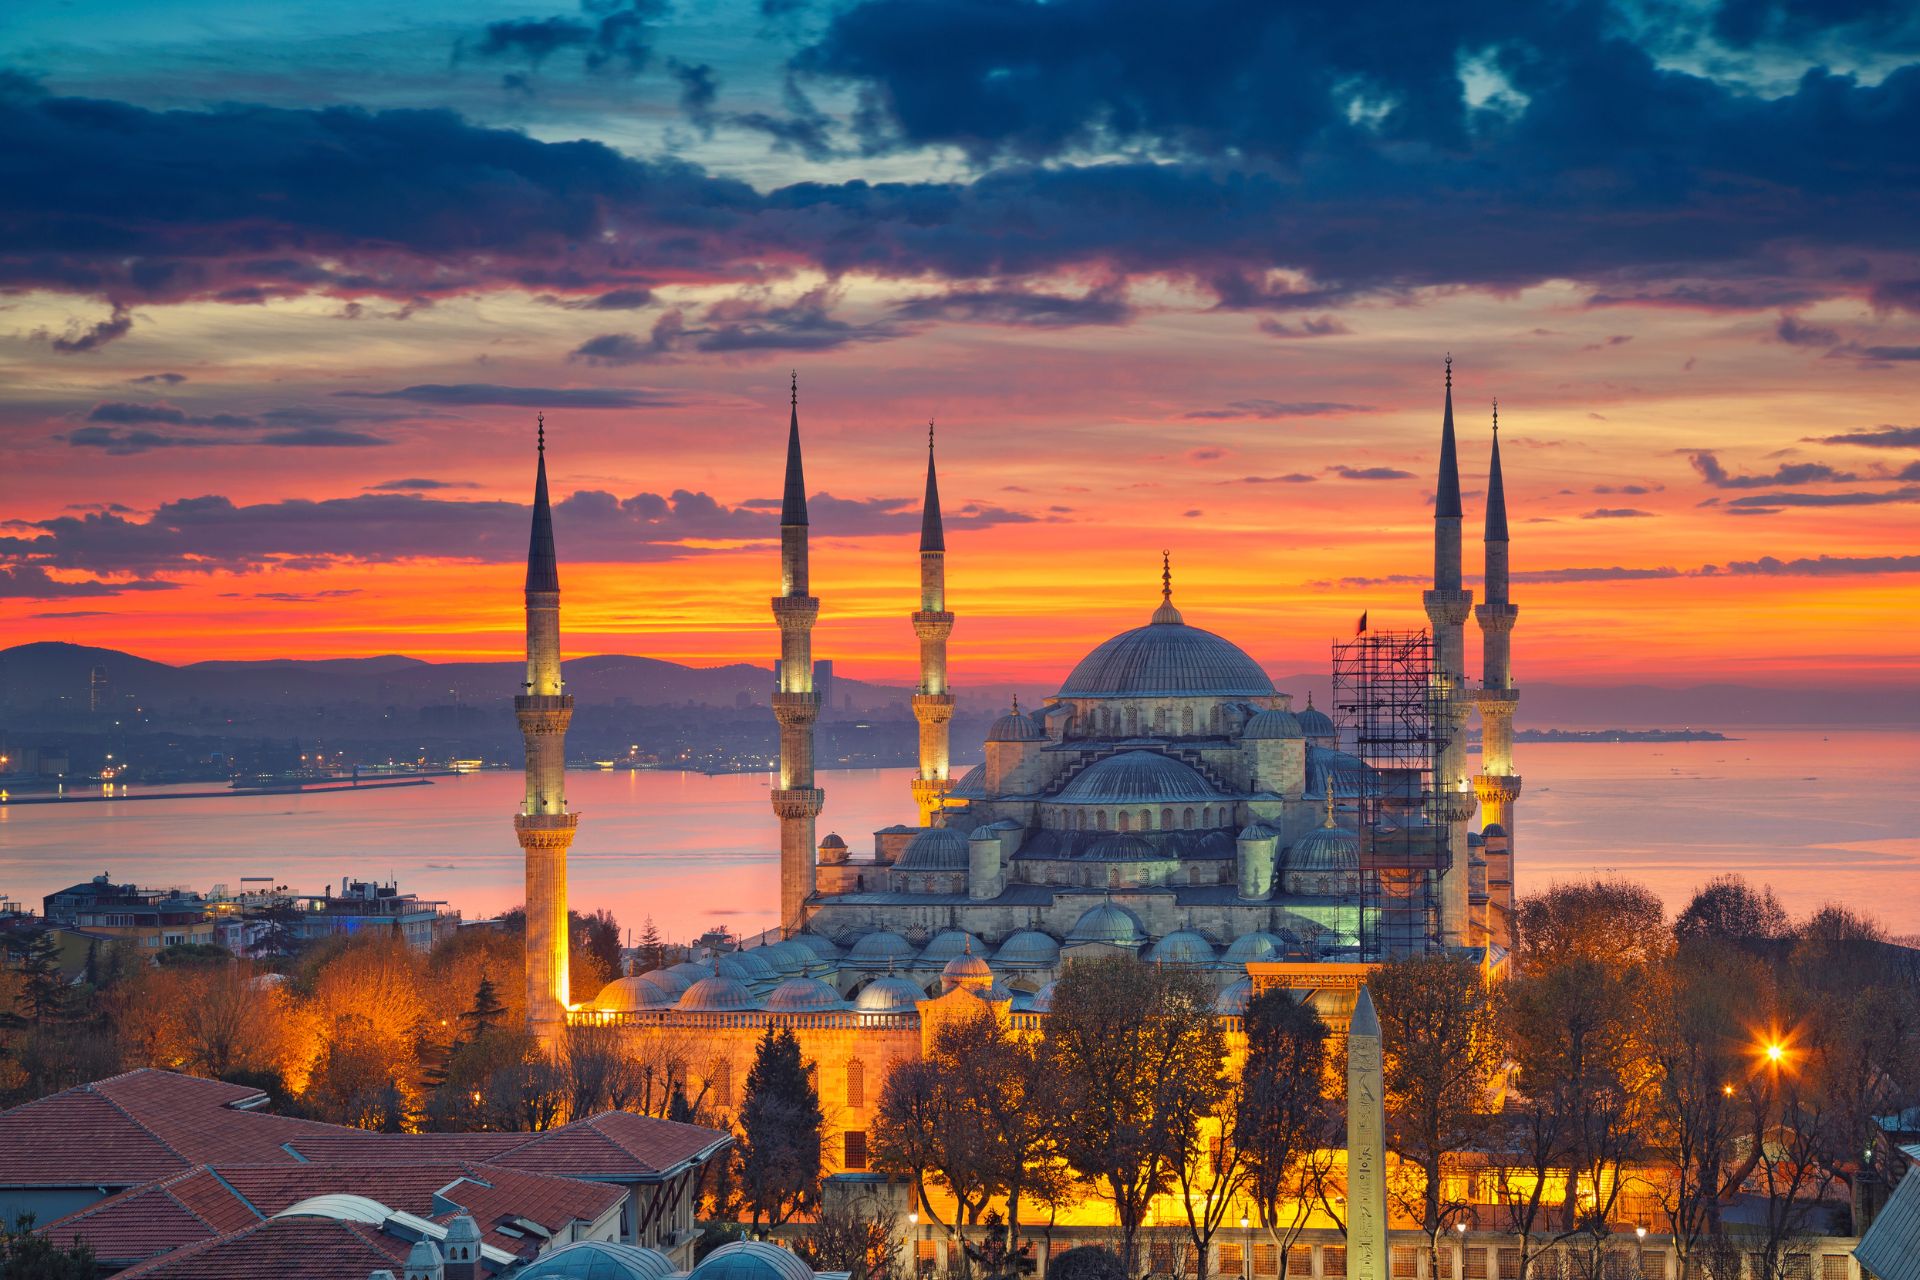 Image of the Blue Mosque in Istanbul, Turkey during dramatic sunrise©Getty Images